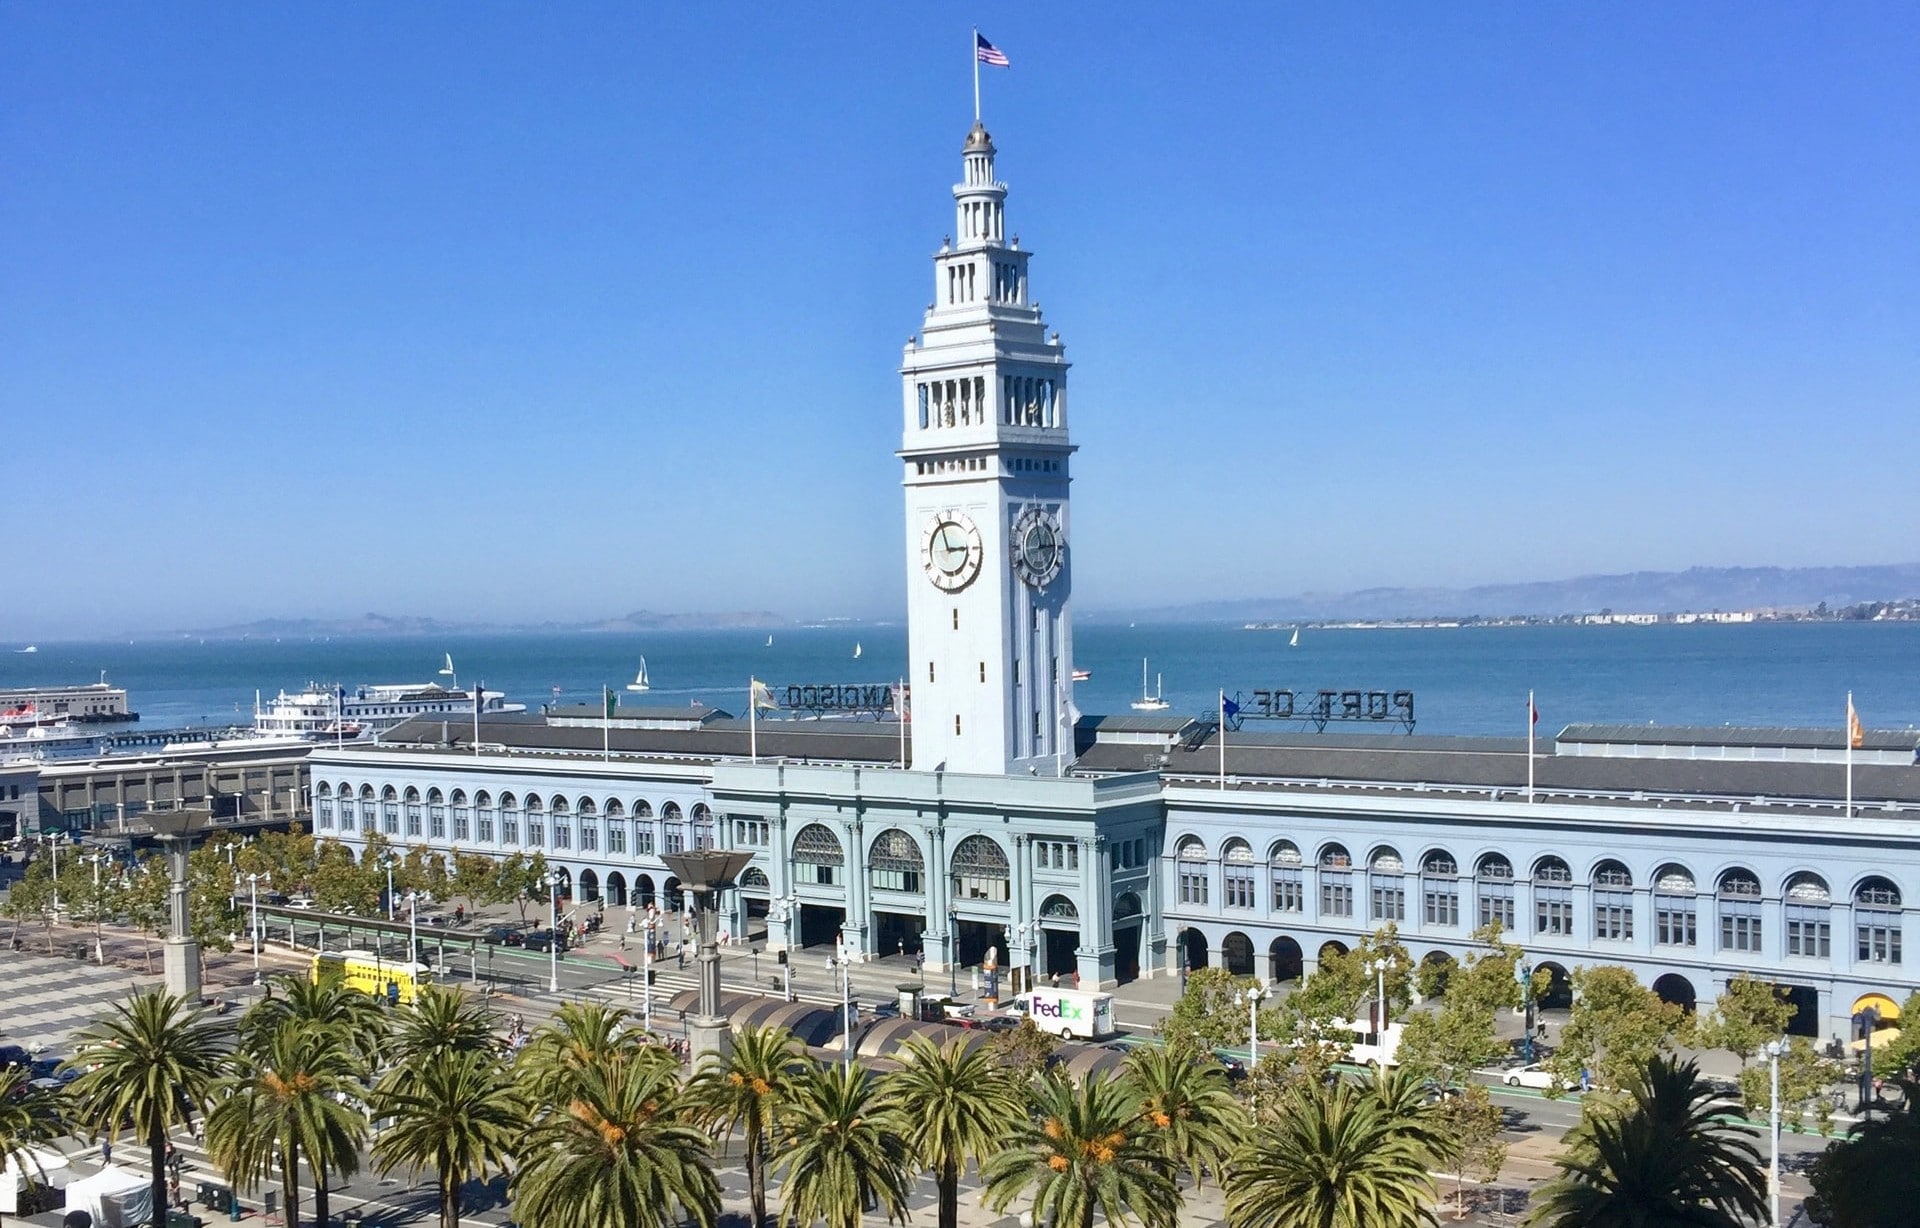 San Francisco's Ferry Building with a line of palm trees in front and Bay views in the background.